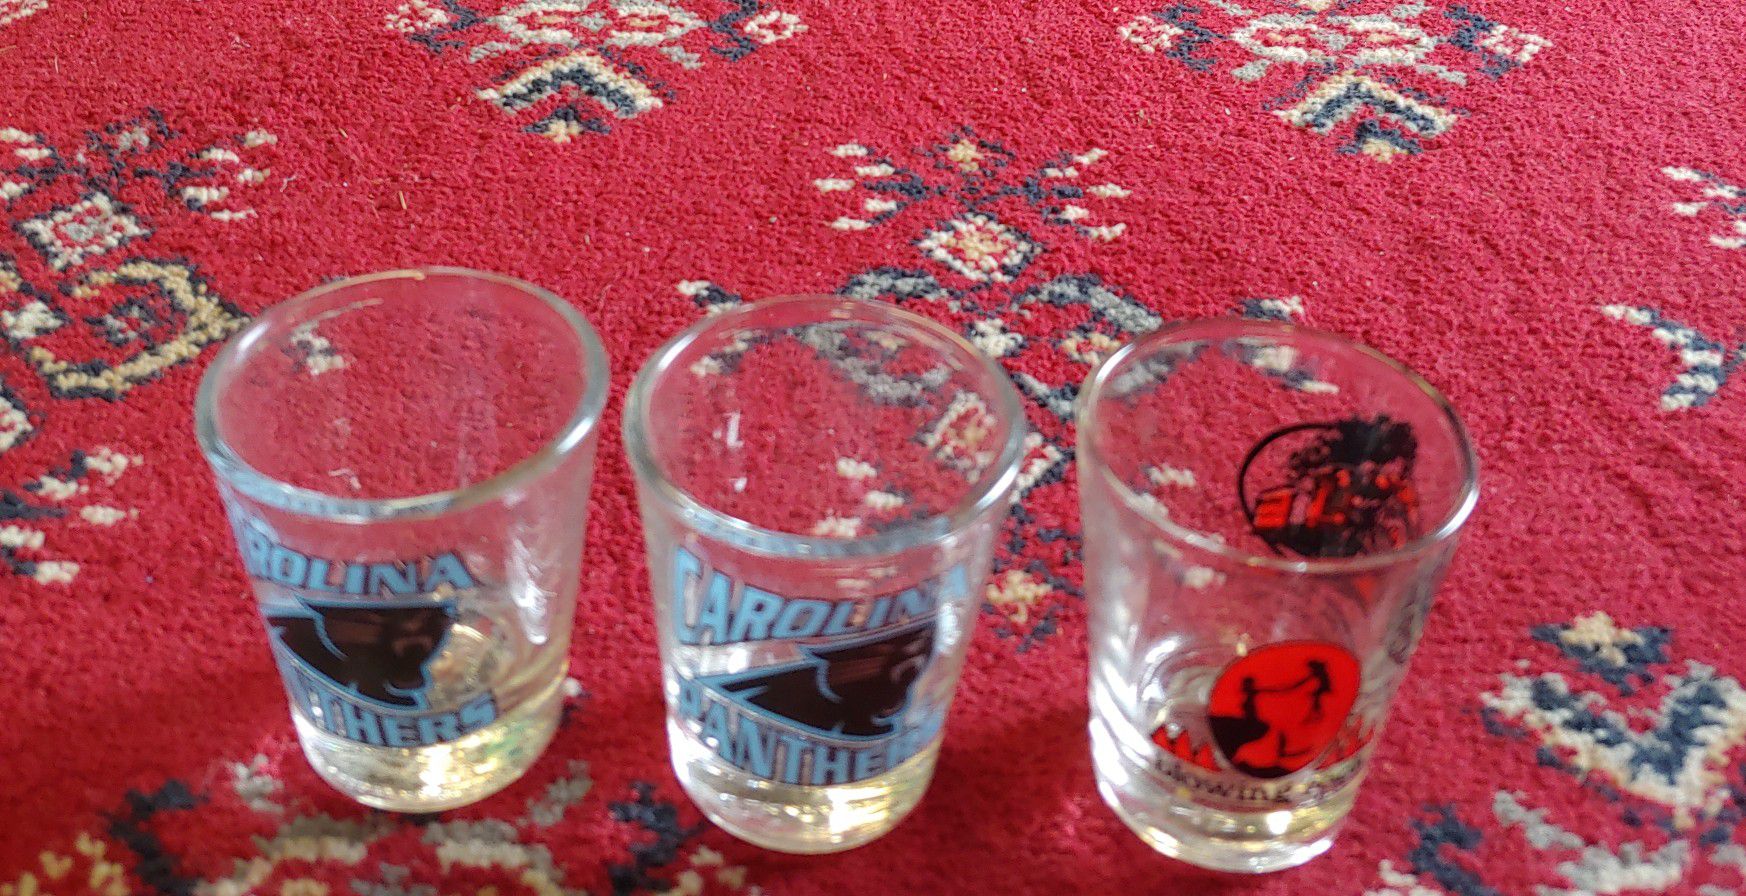 Collectable Shot Glasses $2.00 Each